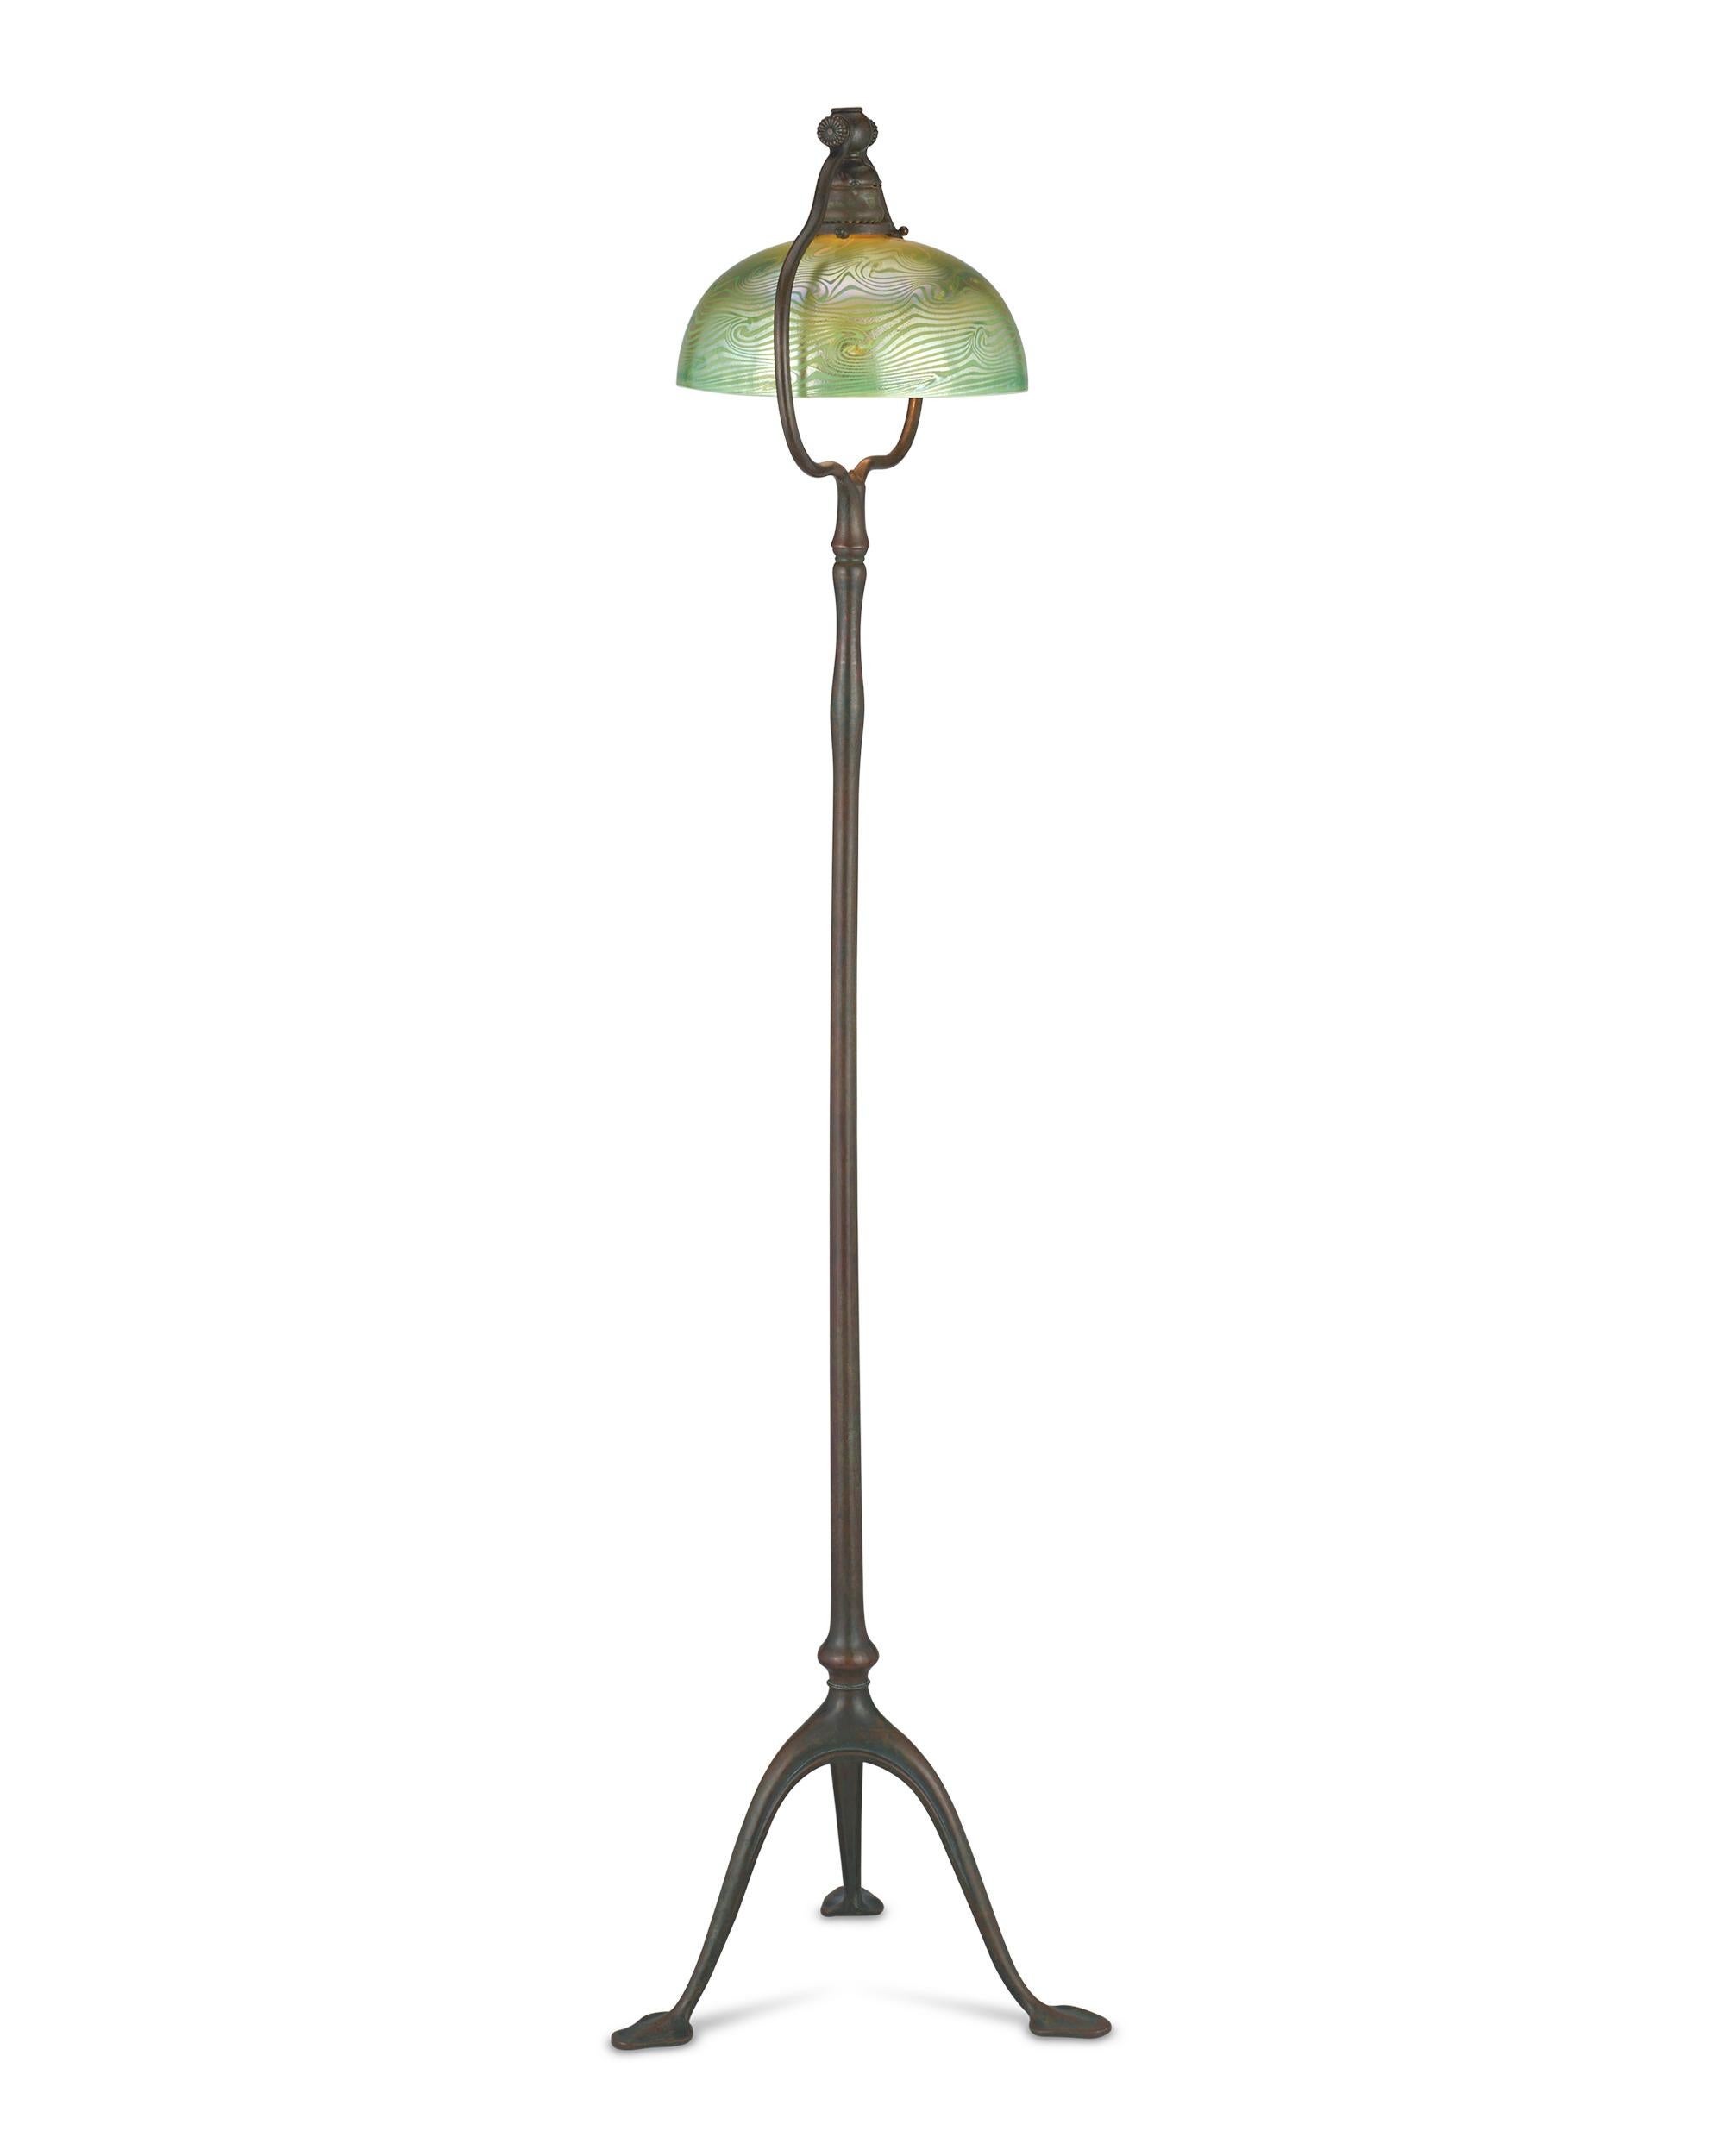 This exceptional floor lamp by Tiffany Studios features an iconic dome shade crafted from the firm's legendary Favrile glass, complemented by its original curved harp bronze base that accentuates the shade's overall form. Supported by three